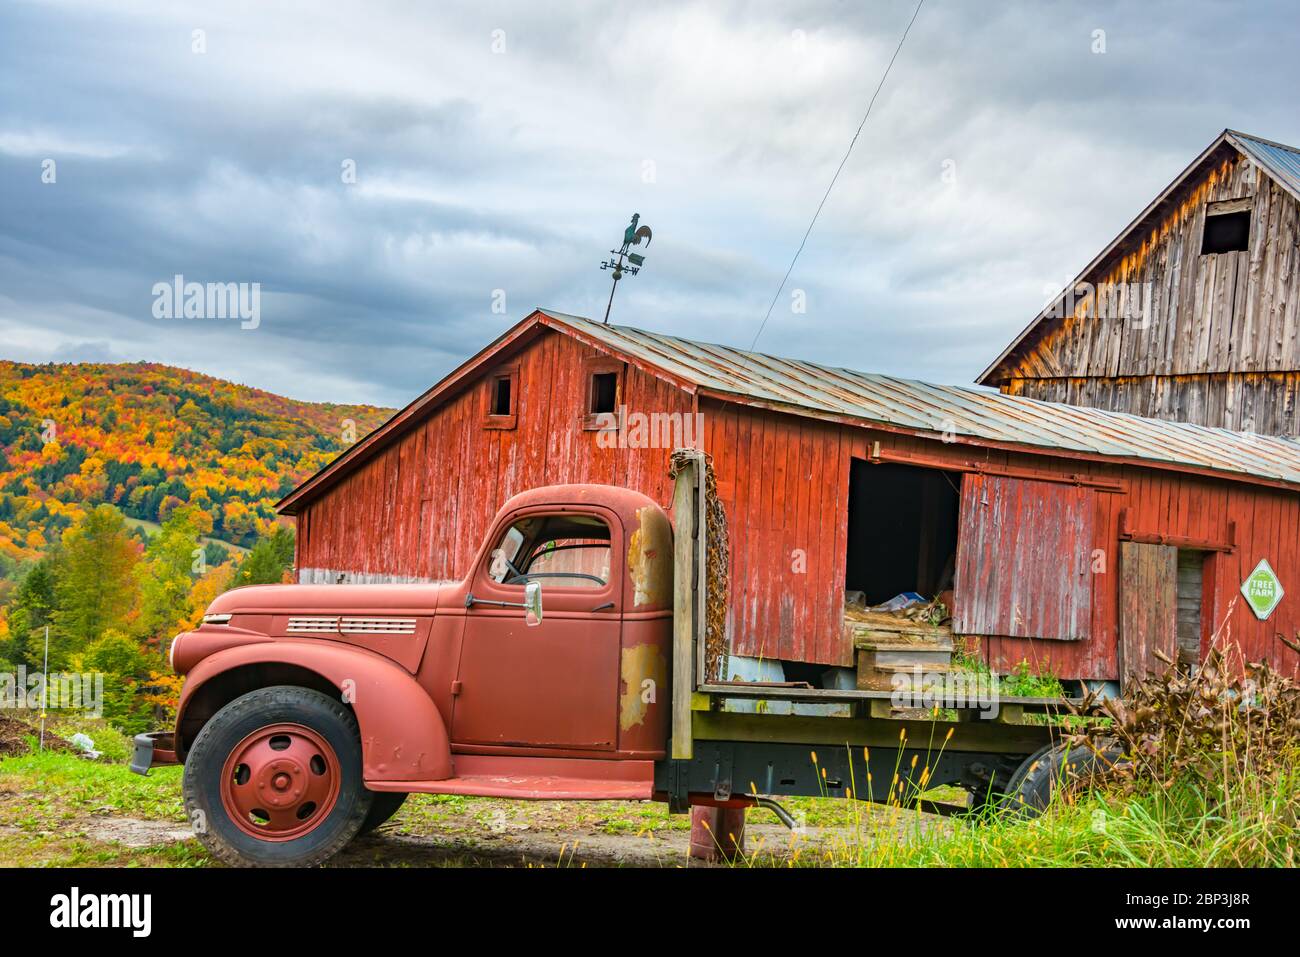 Old Red Truck, Barn & Fall Lauiage on Mountain, Vermont Stockfoto